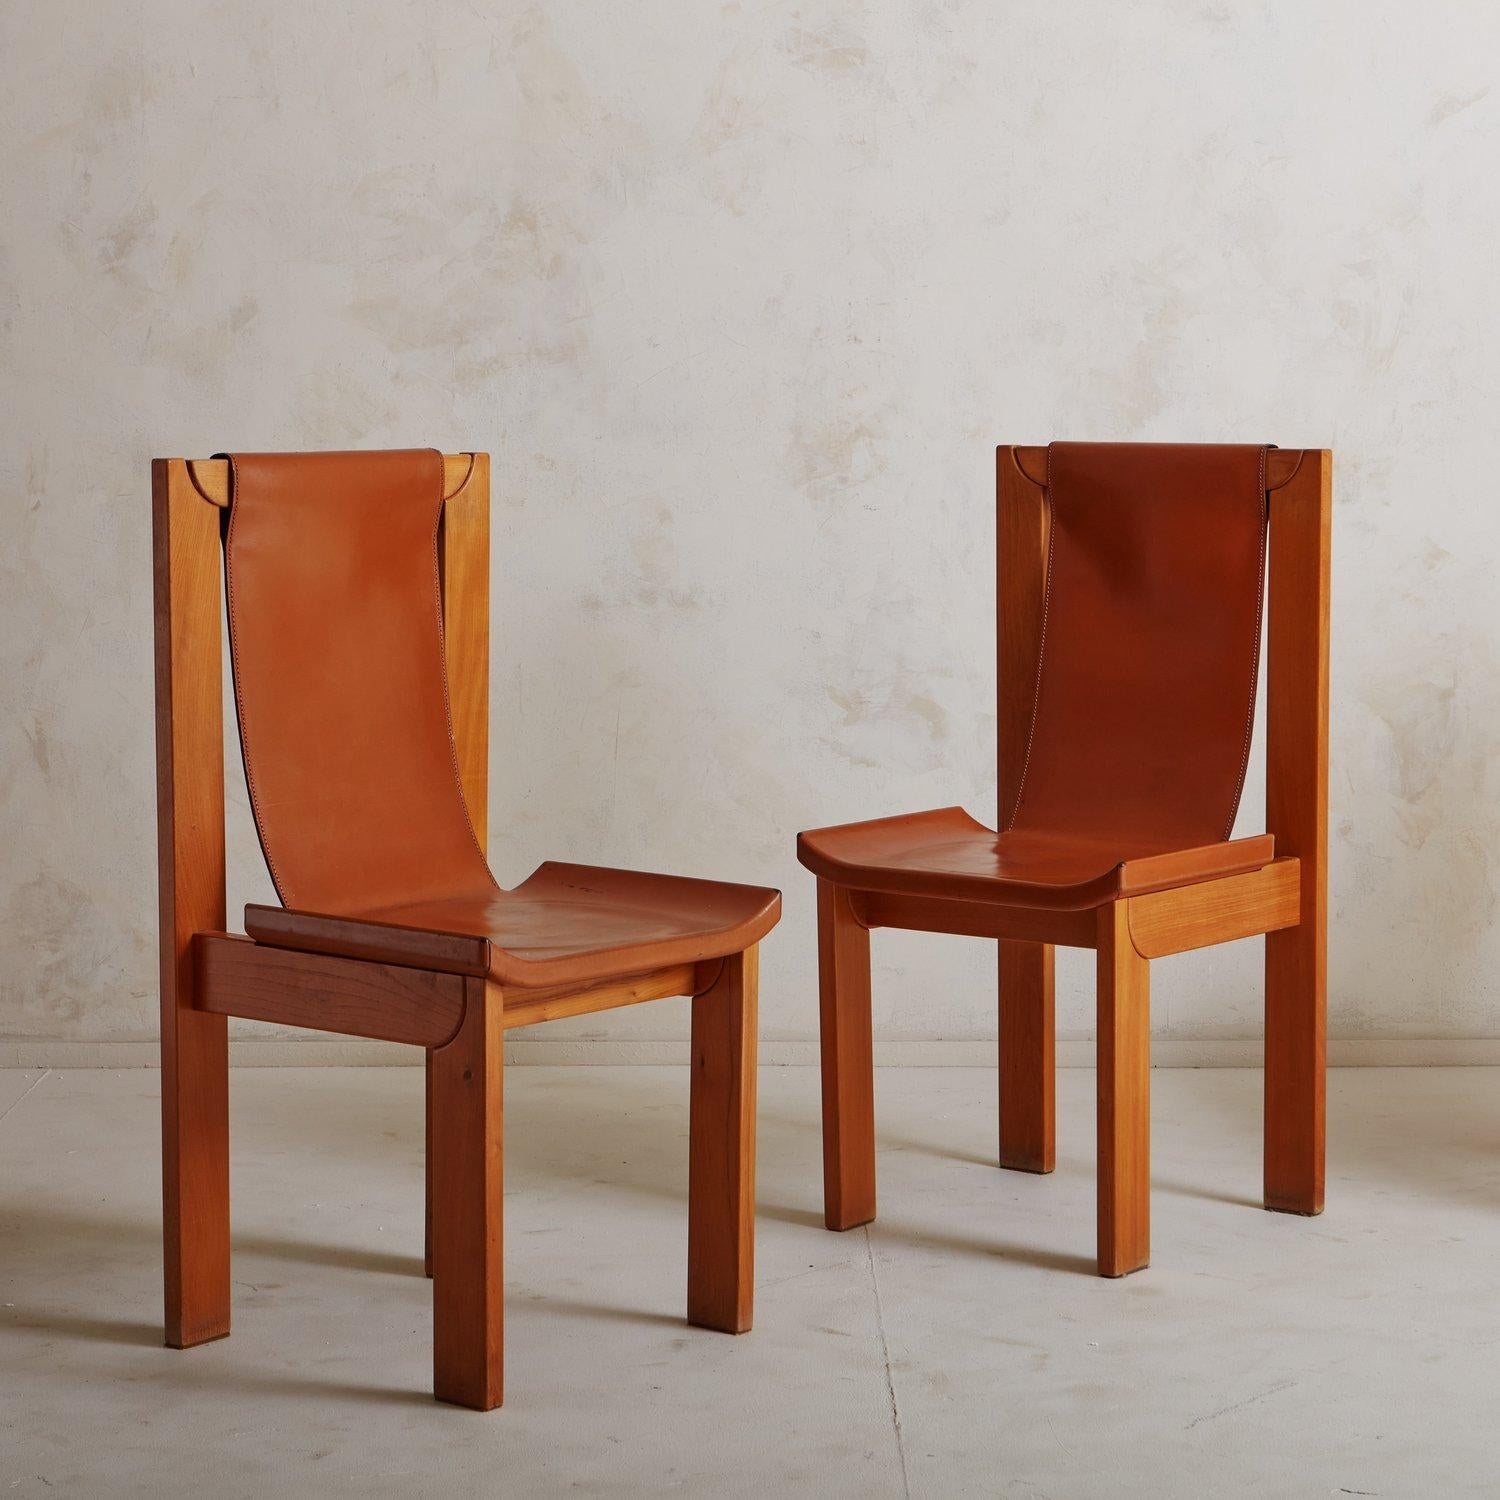 Late 20th Century Set of 5 Elm Wood + Cognac Leather Slingback Dining Chairs, Italy, 1970s